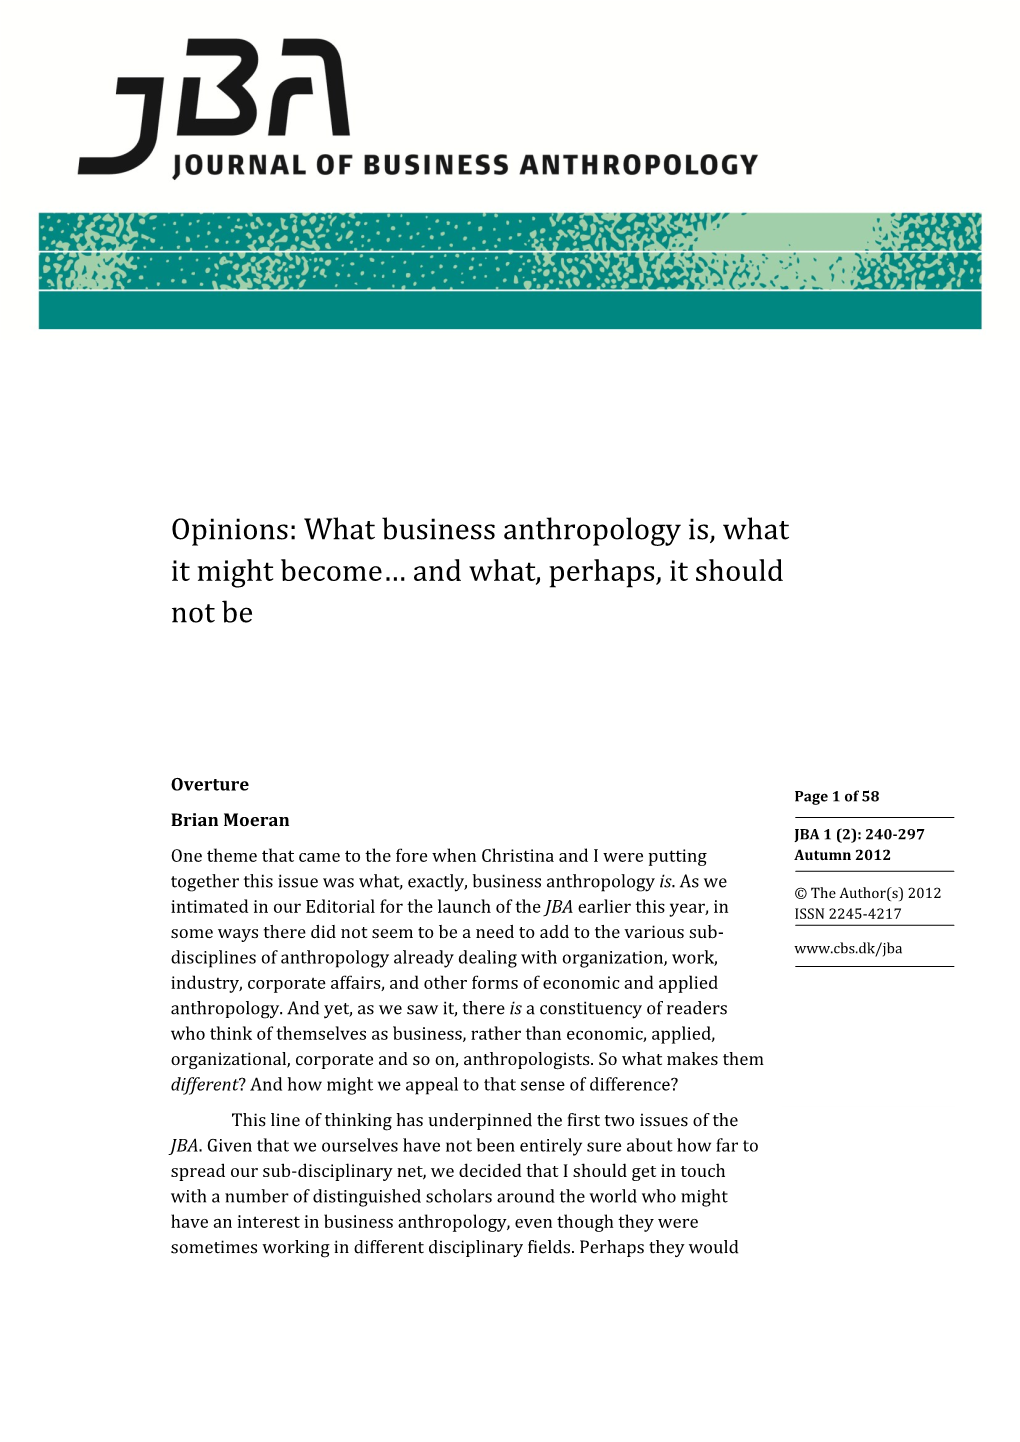 What Business Anthropology Is, What It Might Become… and What, Perhaps, It Should Not Be